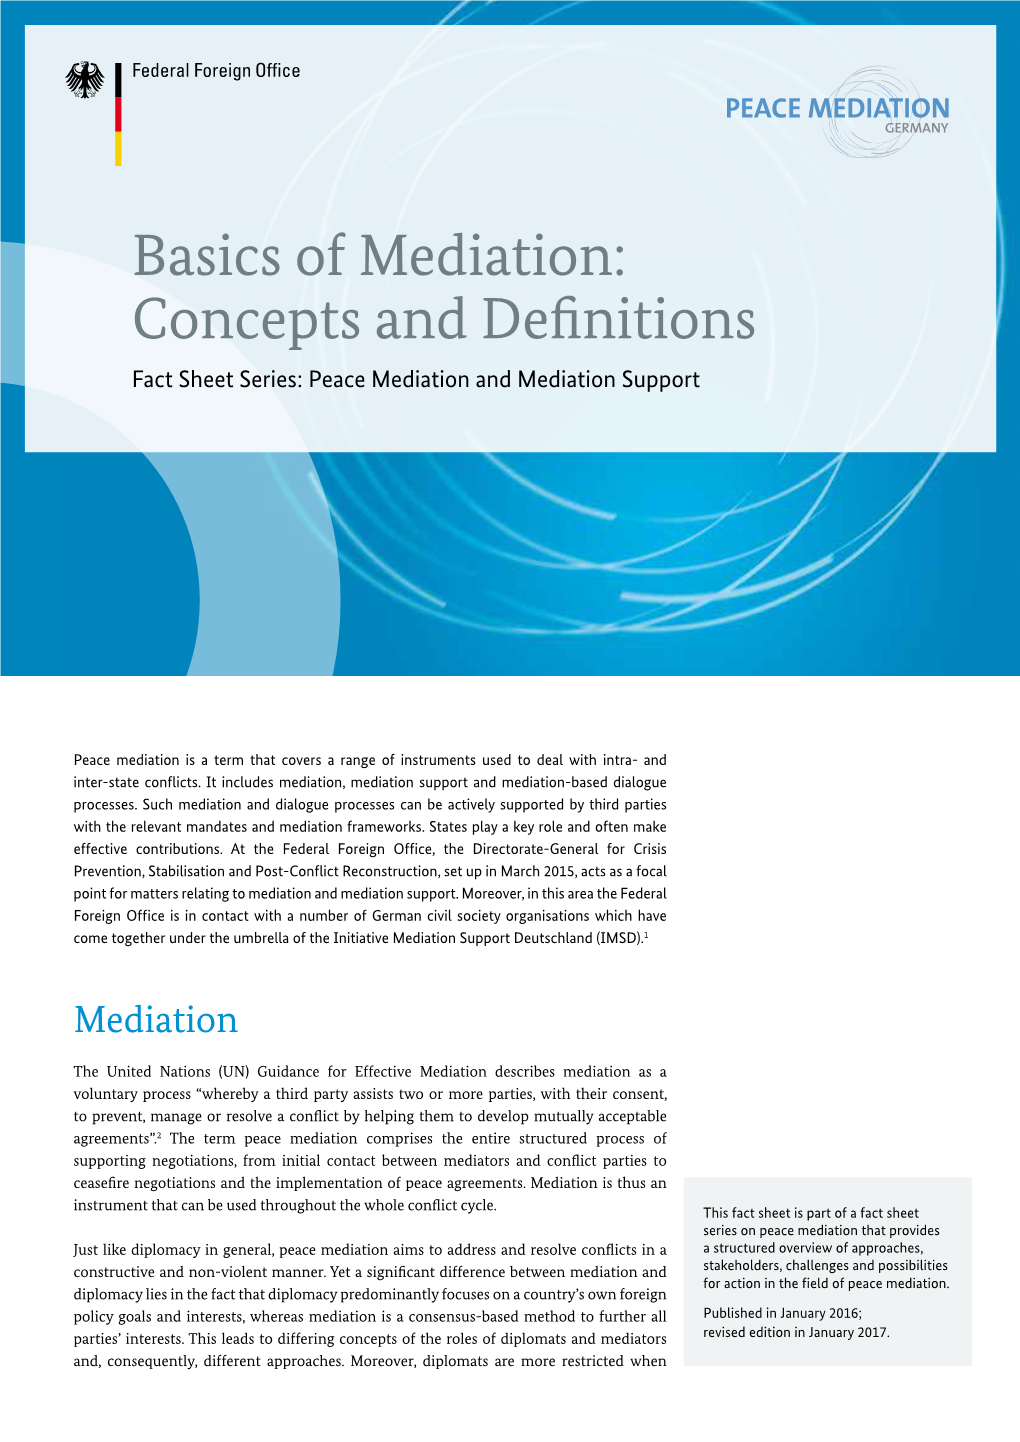 Basics of Mediation: Concepts and Definitions Fact Sheet Series: Peace Mediation and Mediation Support